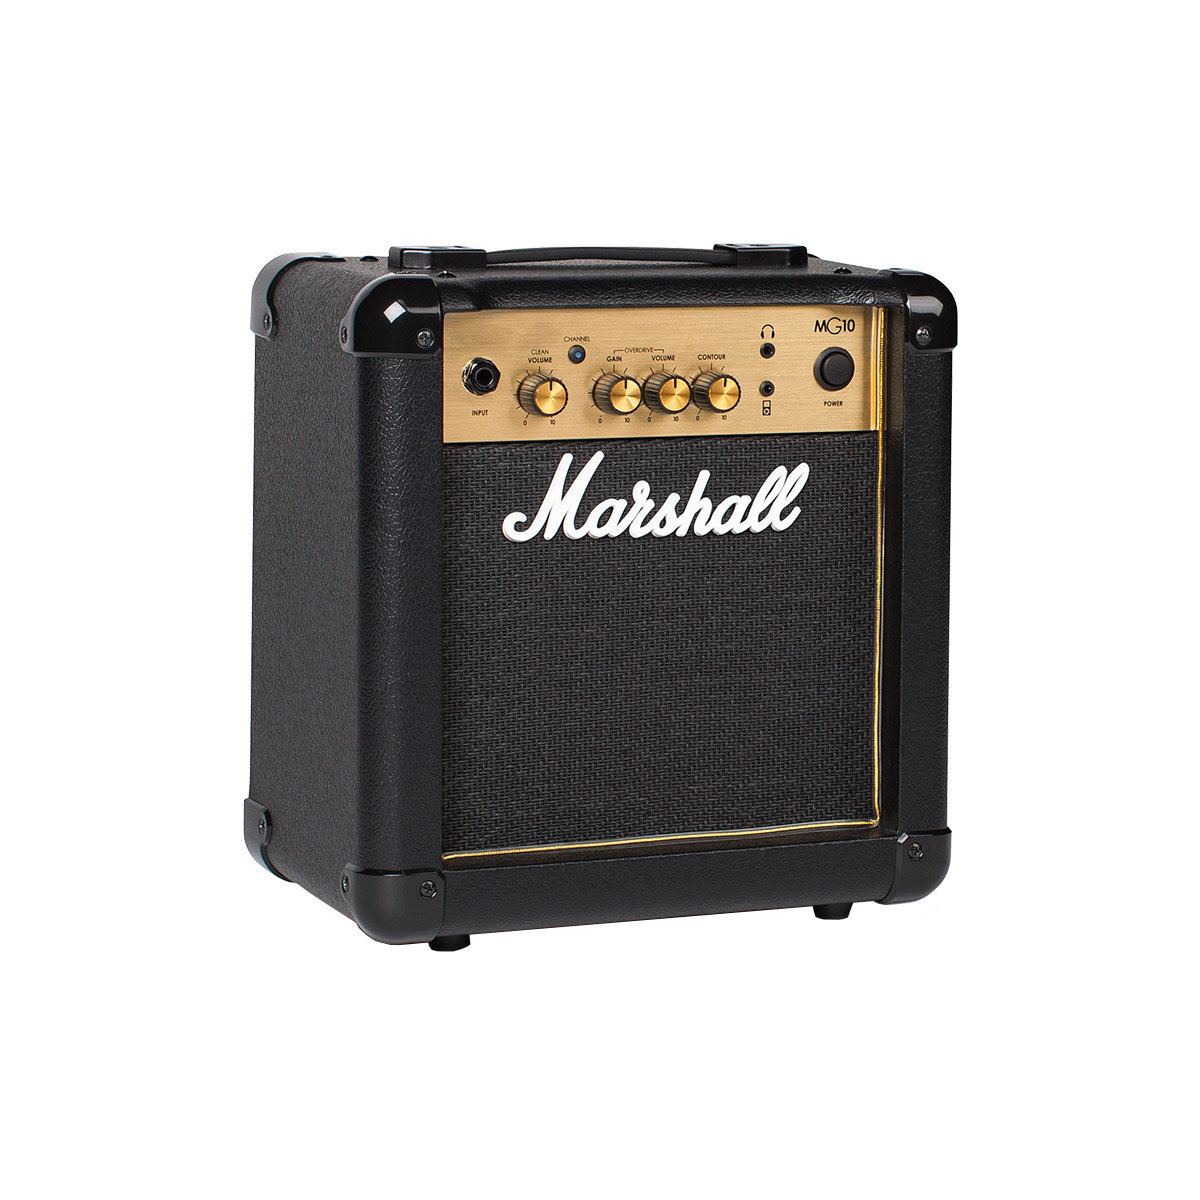 https://www.sonopro-discount.com/images/Image/MARSHALL-MG10G-AMPLI-GUITARE-ELECTRIQUE-Combo-10-W-MG10G.jpg